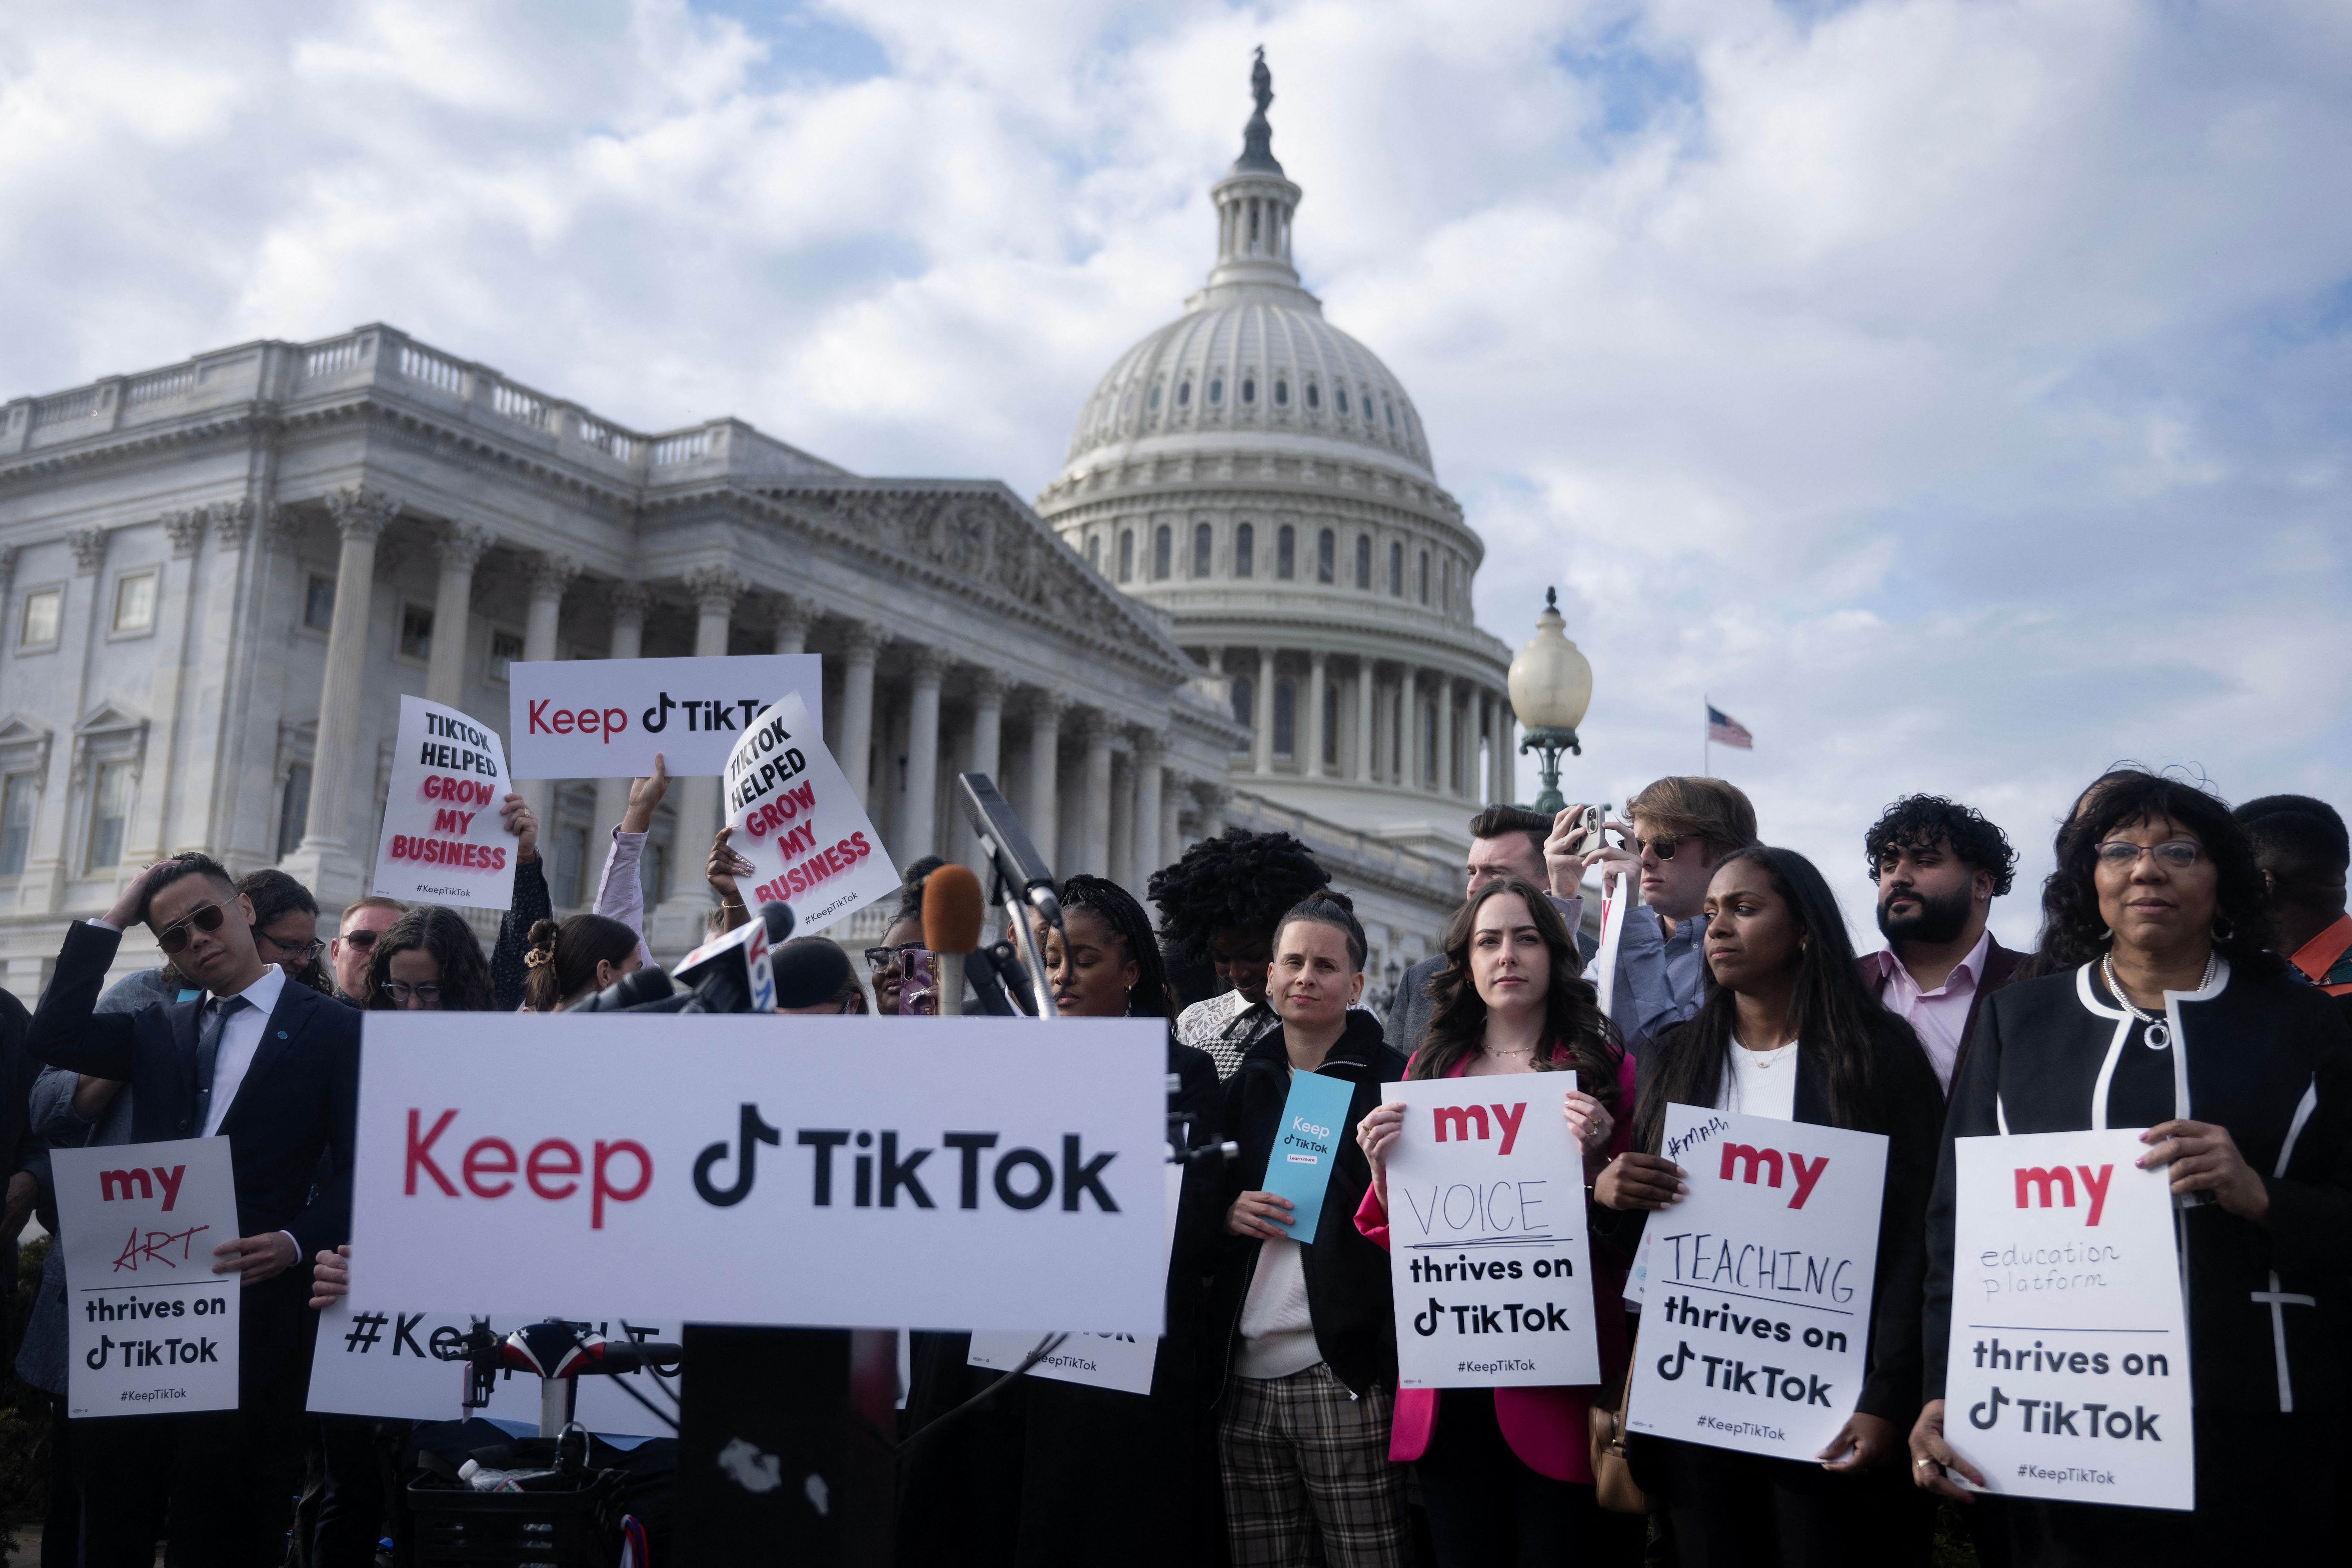 A group of protesters gathers in front of the US Capitol building, holding signs that support TikTok.